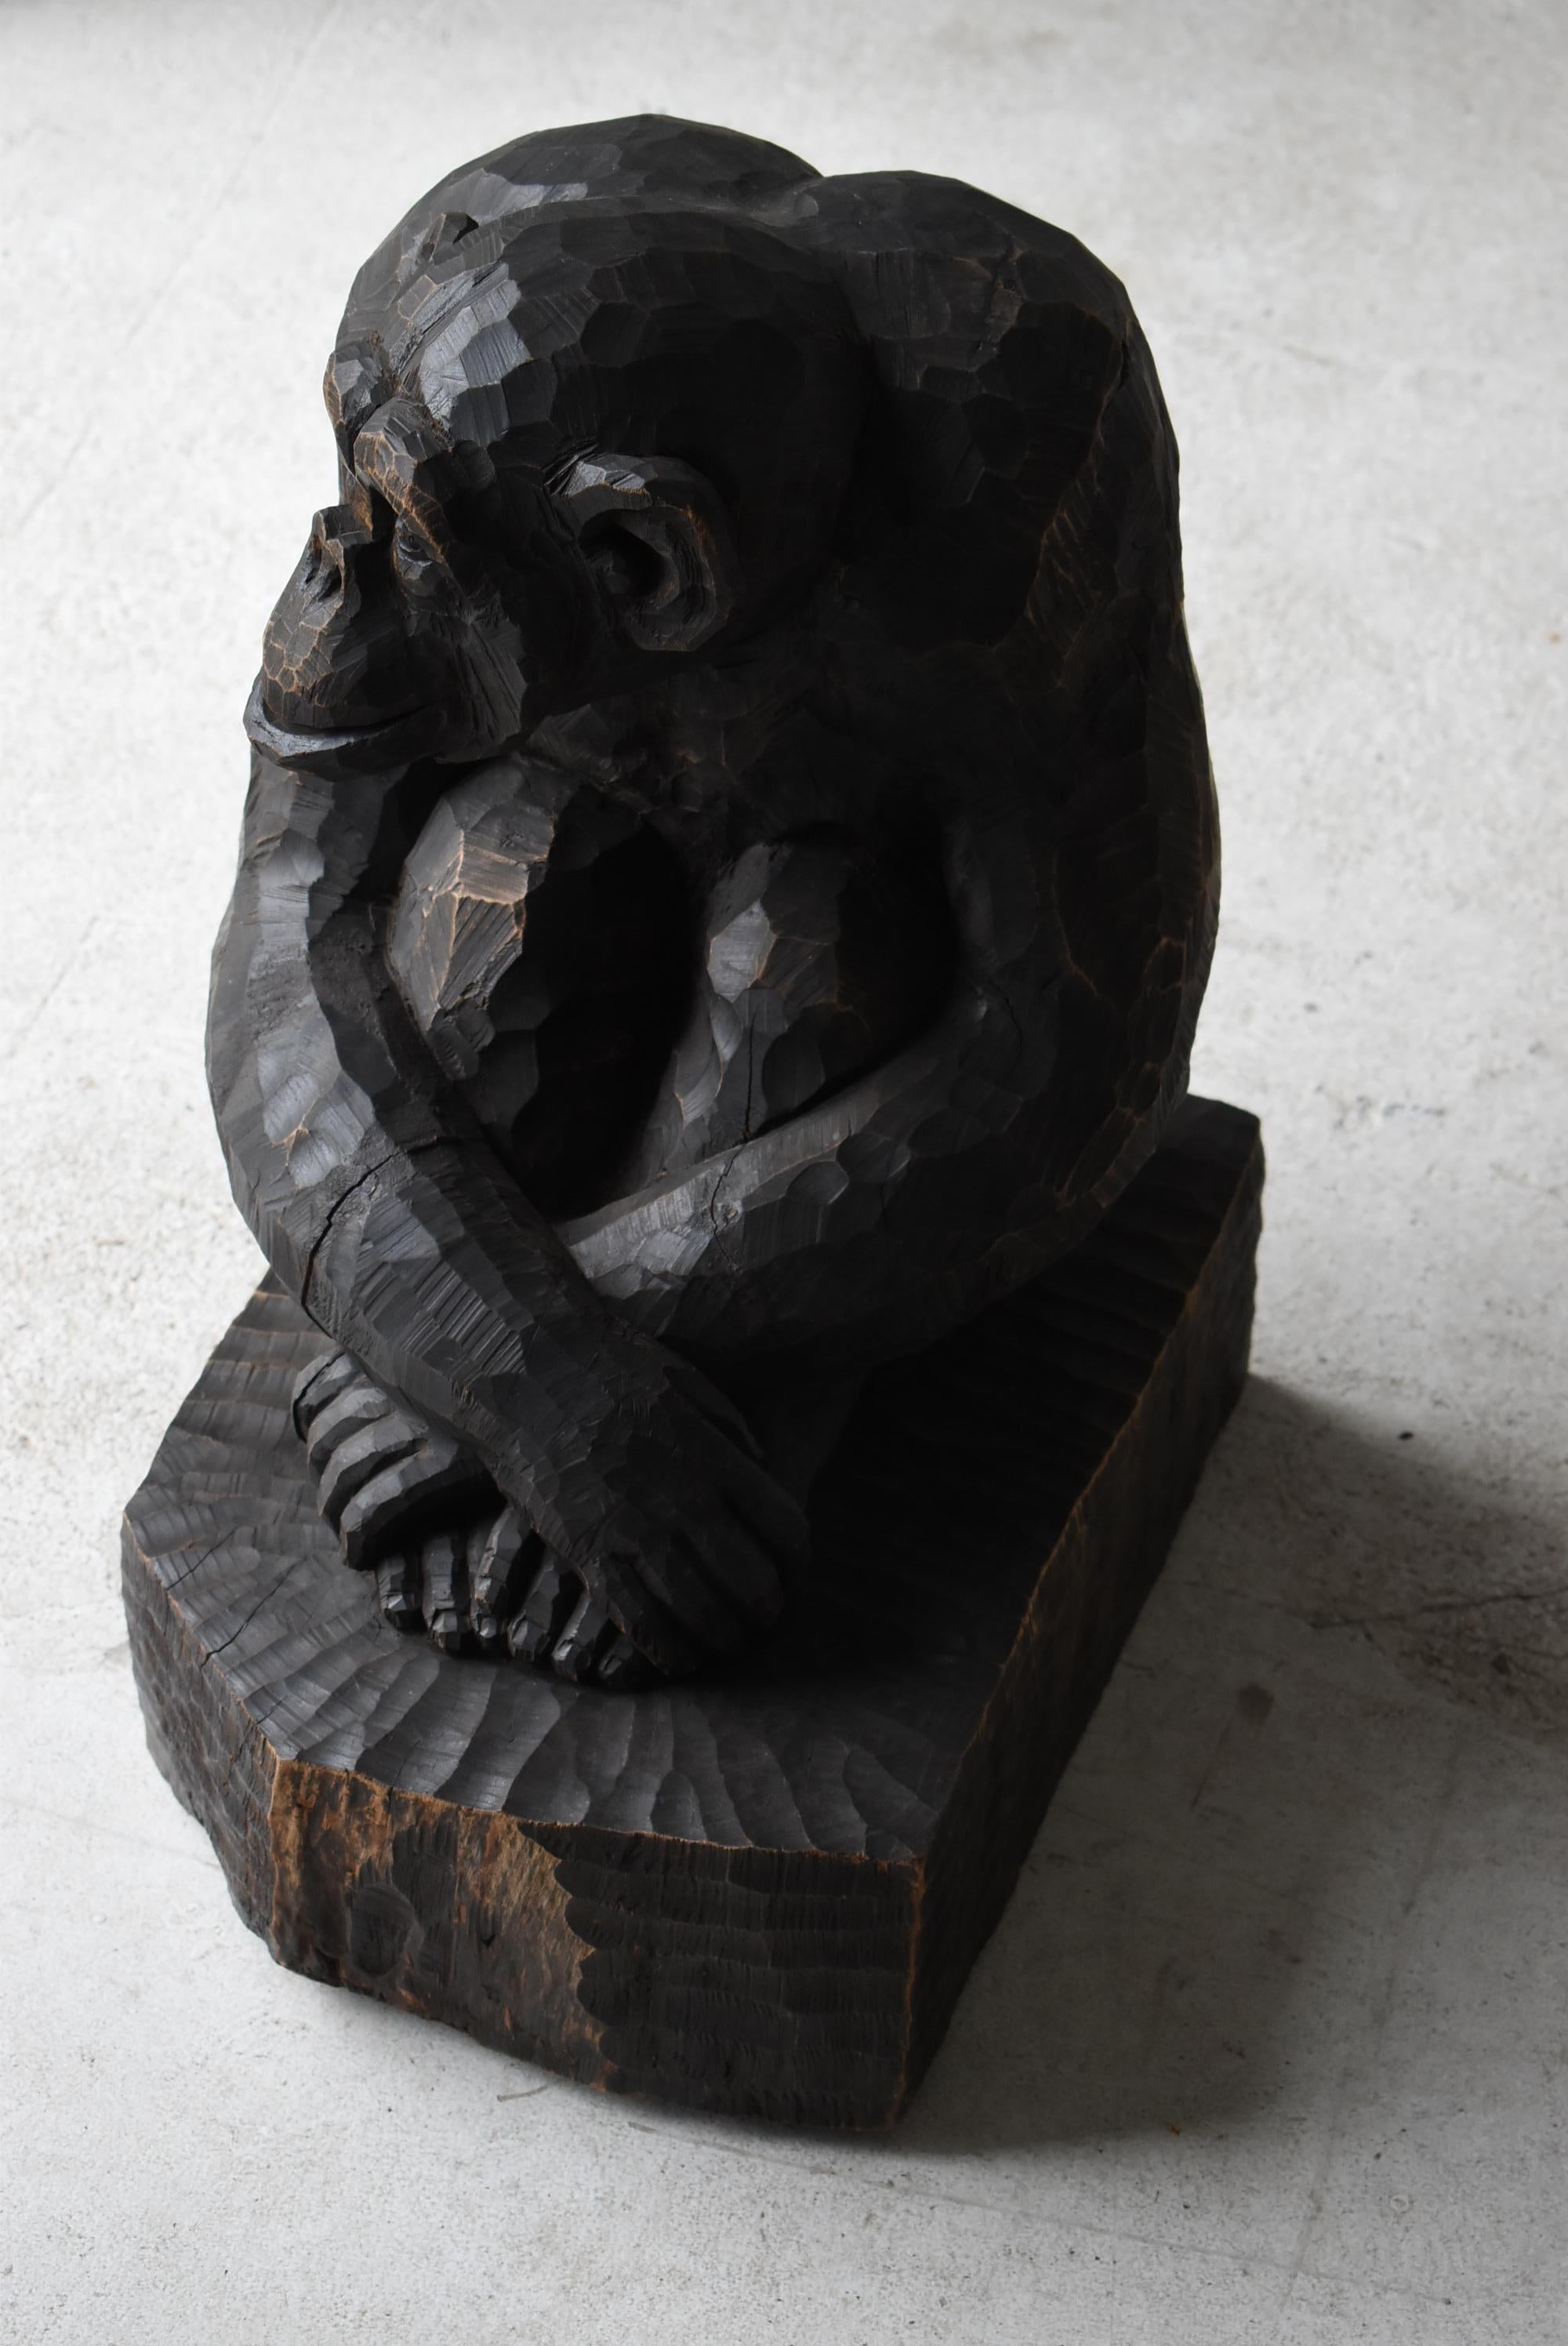 Japanese Old Wood Sculpture Chimpanzee 1940s-1960s / Wood Carving Mingei  For Sale 13